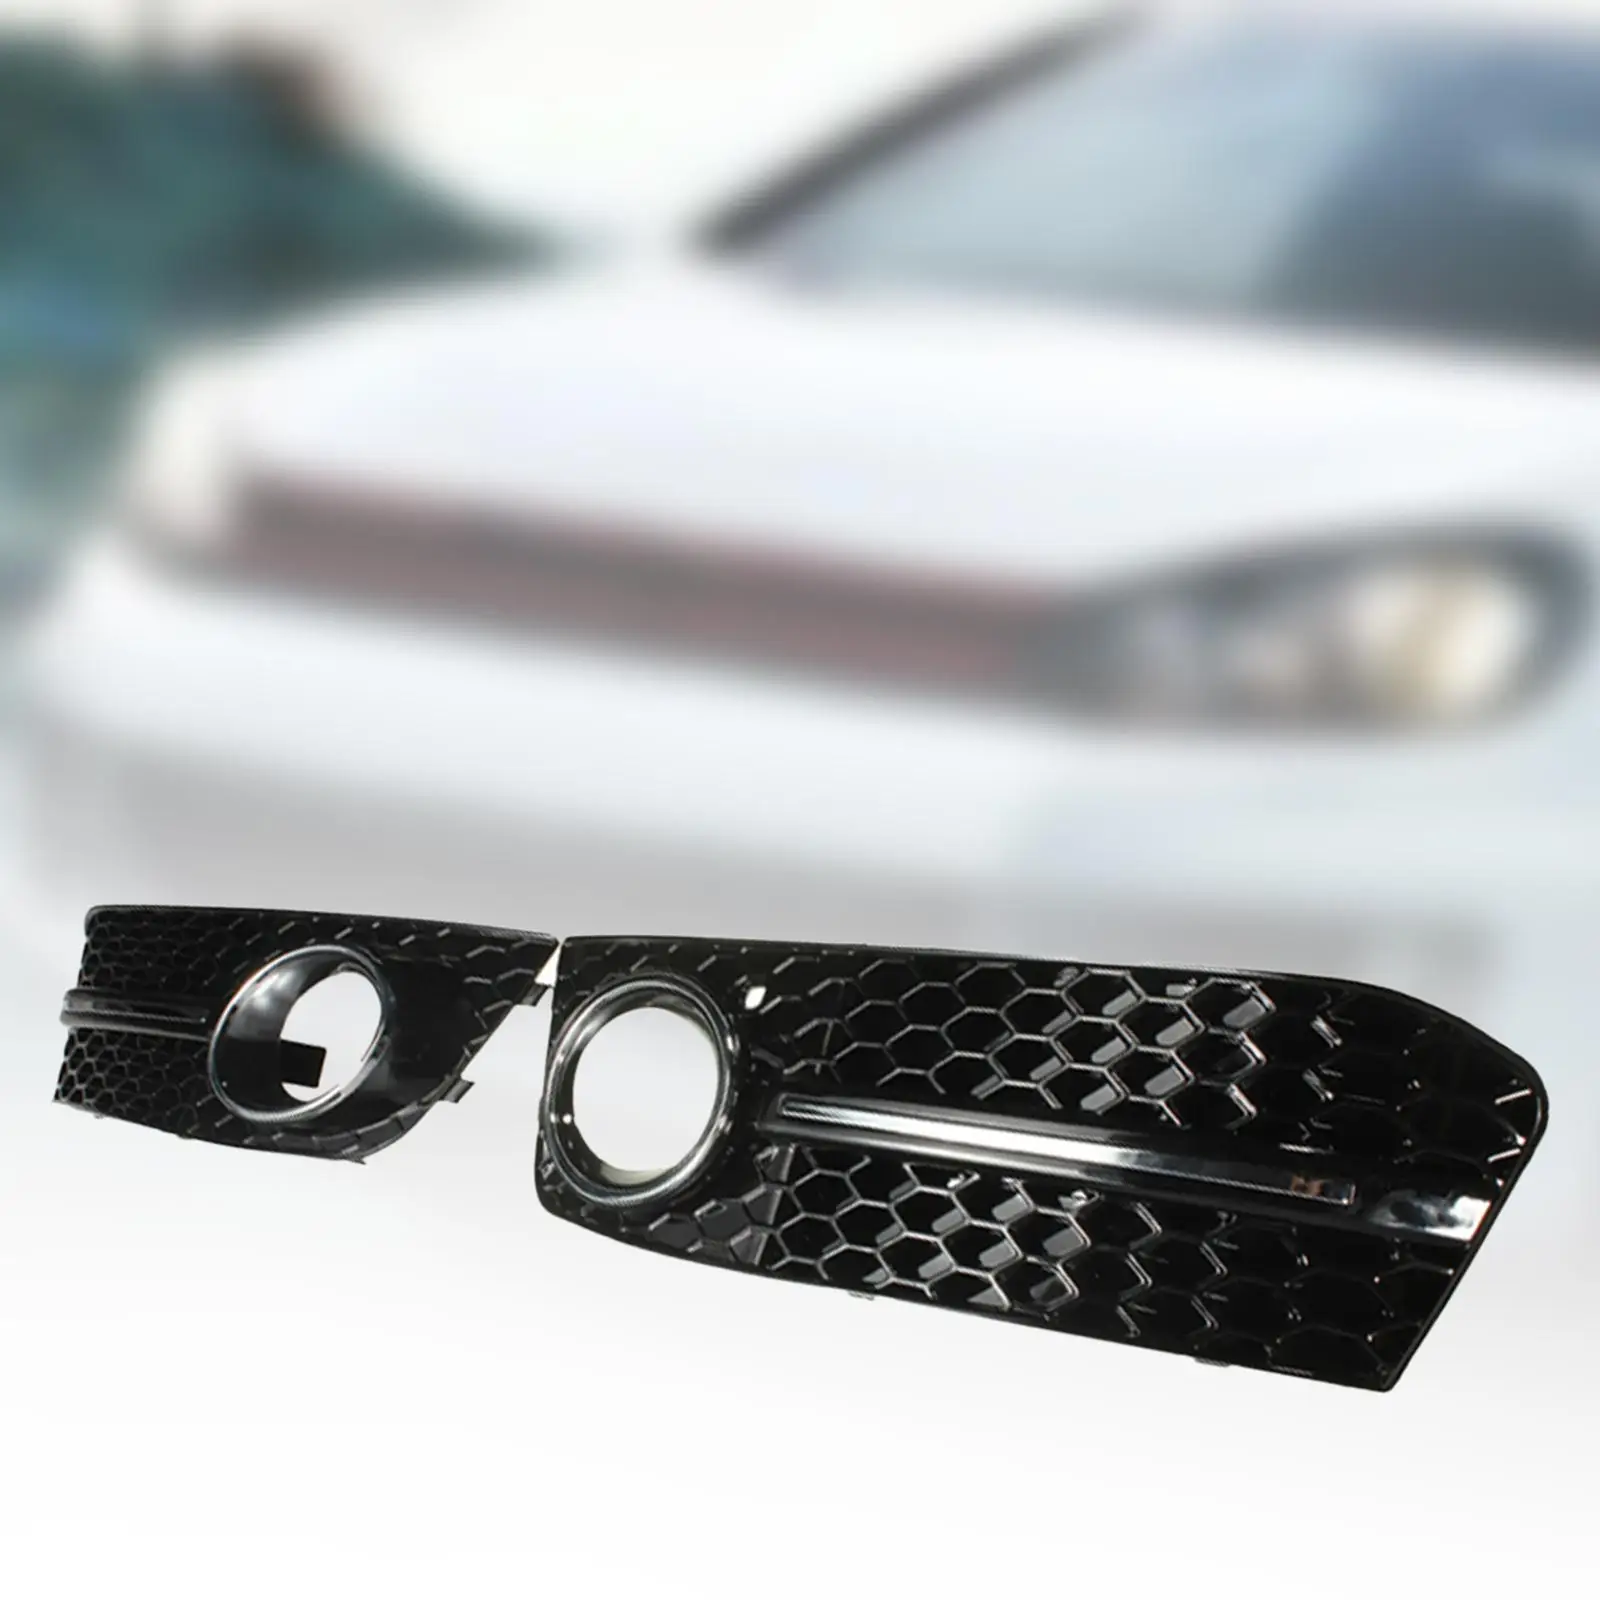 2Pcs Automotive Fog Light Cover Grille/ 8K0807681 Glossy Black Left Right Honeycomb for A4 B8 Easy Installation Replacement/